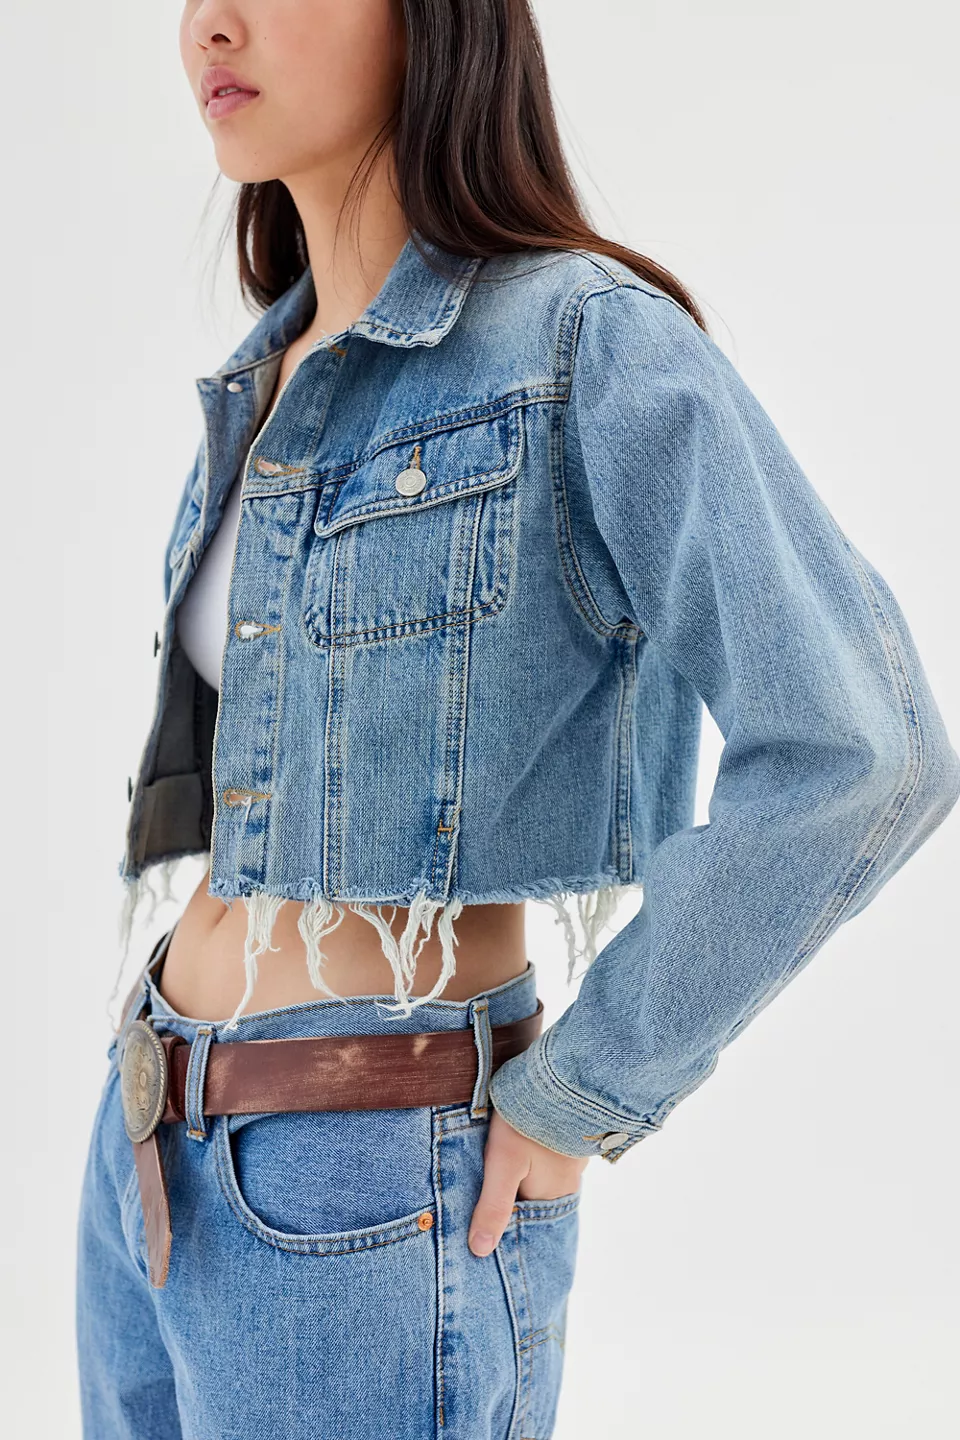 urbanoutfitters.com | Urban Renewal Remade Raw Cropped Fit Denim Jacket